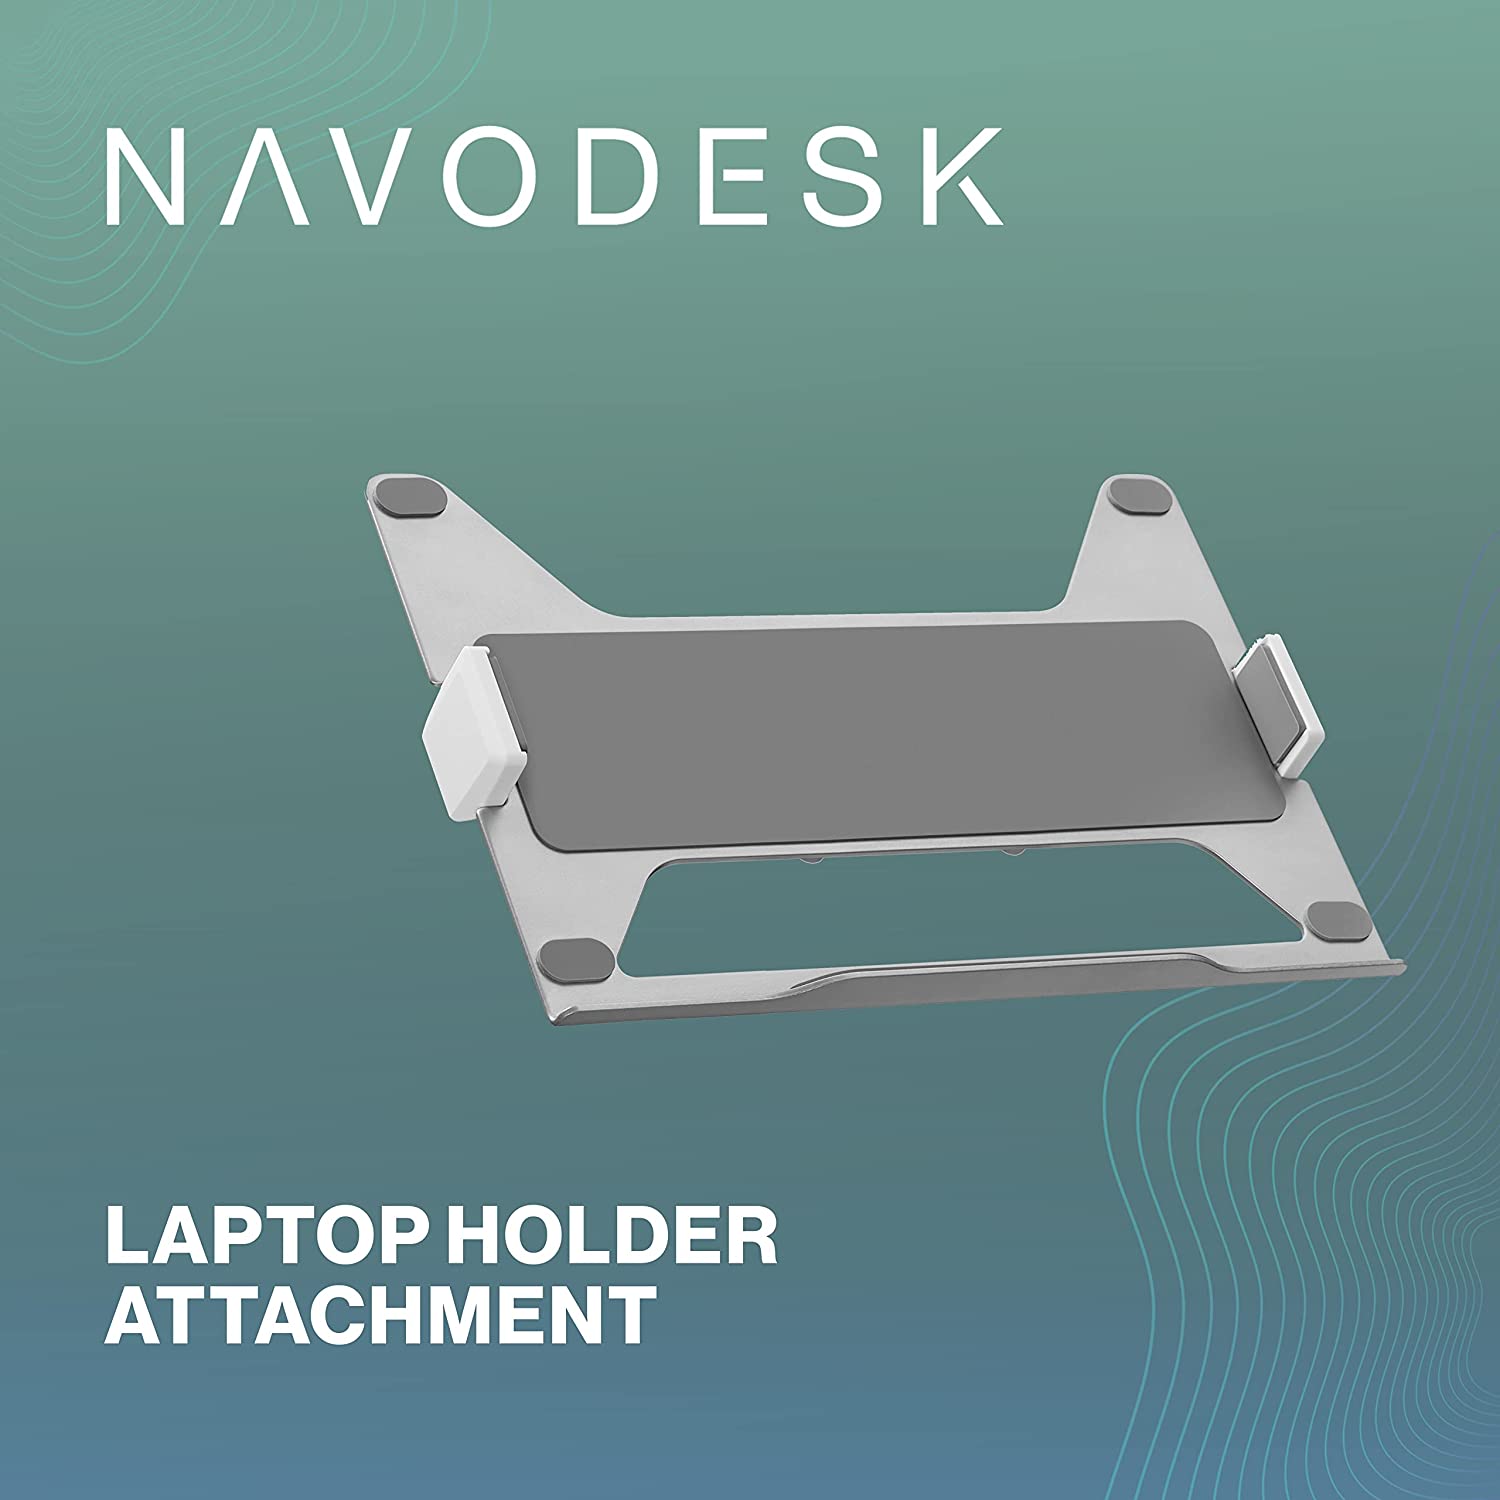 Navodesk Universal Laptop Holder Attachment For Monitor Arms - Fit for 11.6”-17.3” Laptops, Ventilated Design with Anti-Scratch Silicone Pads buy Online